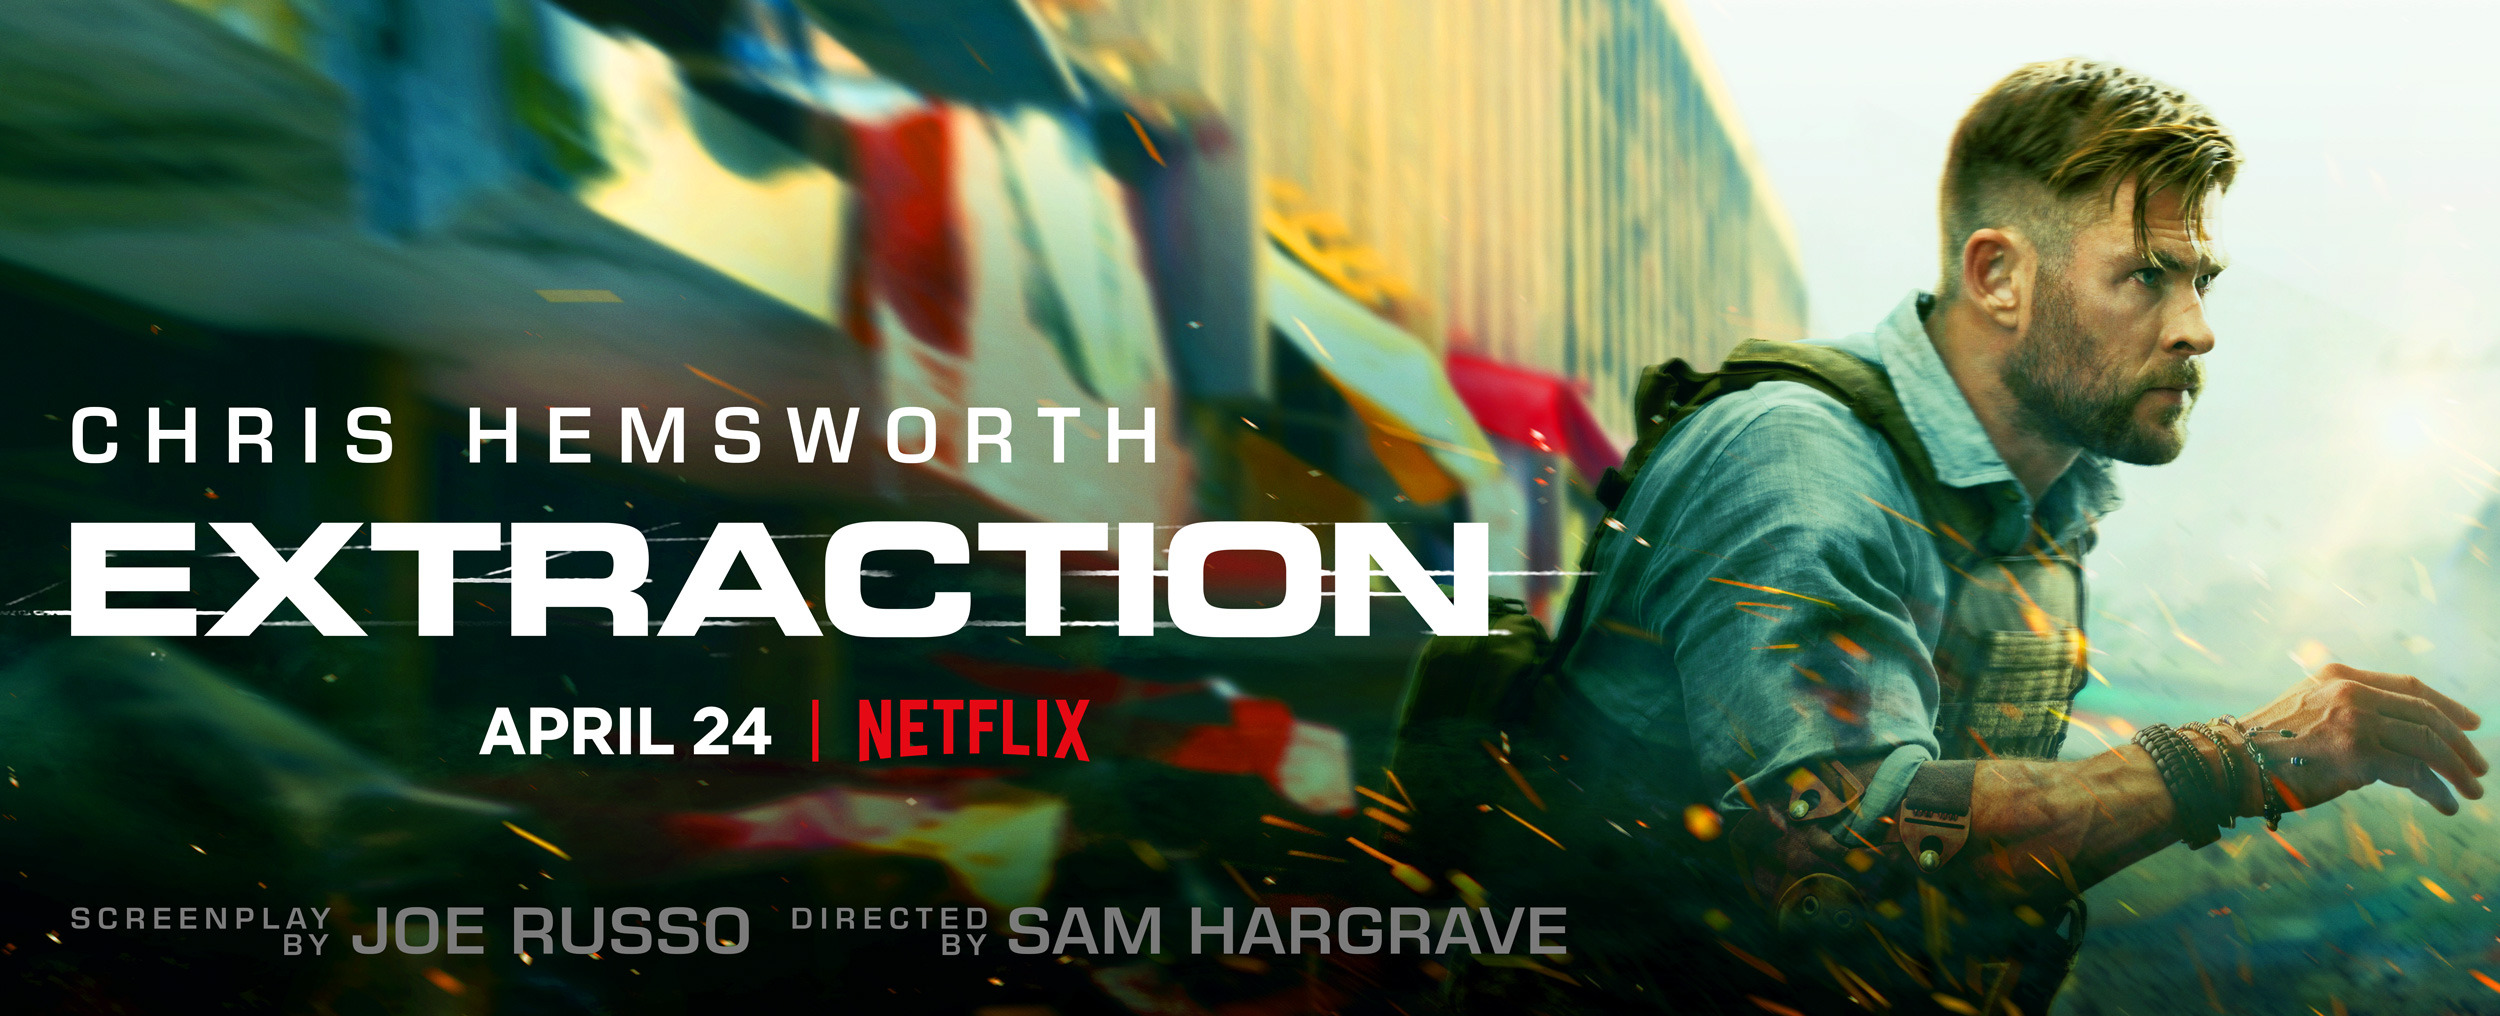 Mega Sized TV Poster Image for Extraction (#4 of 7)